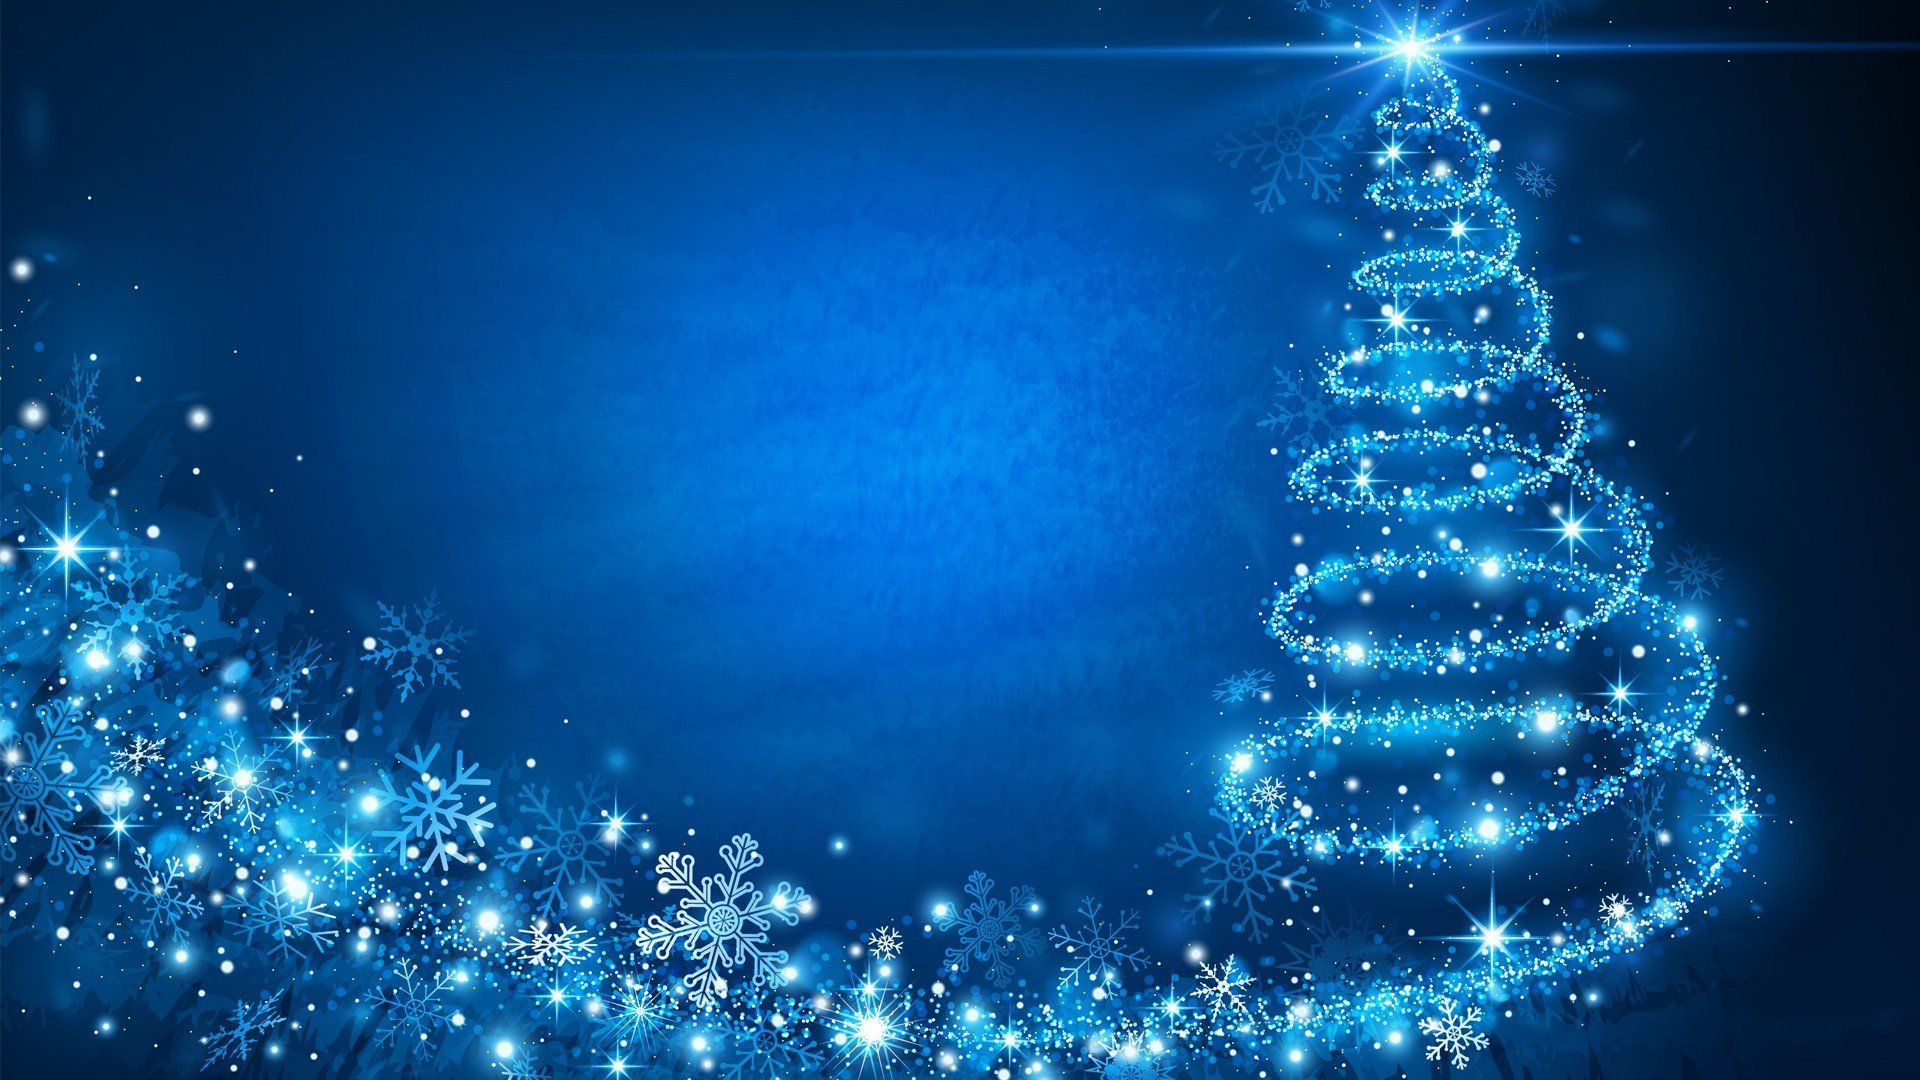 Christmas Windows 10 Wallpapers - Wallpaper Cave